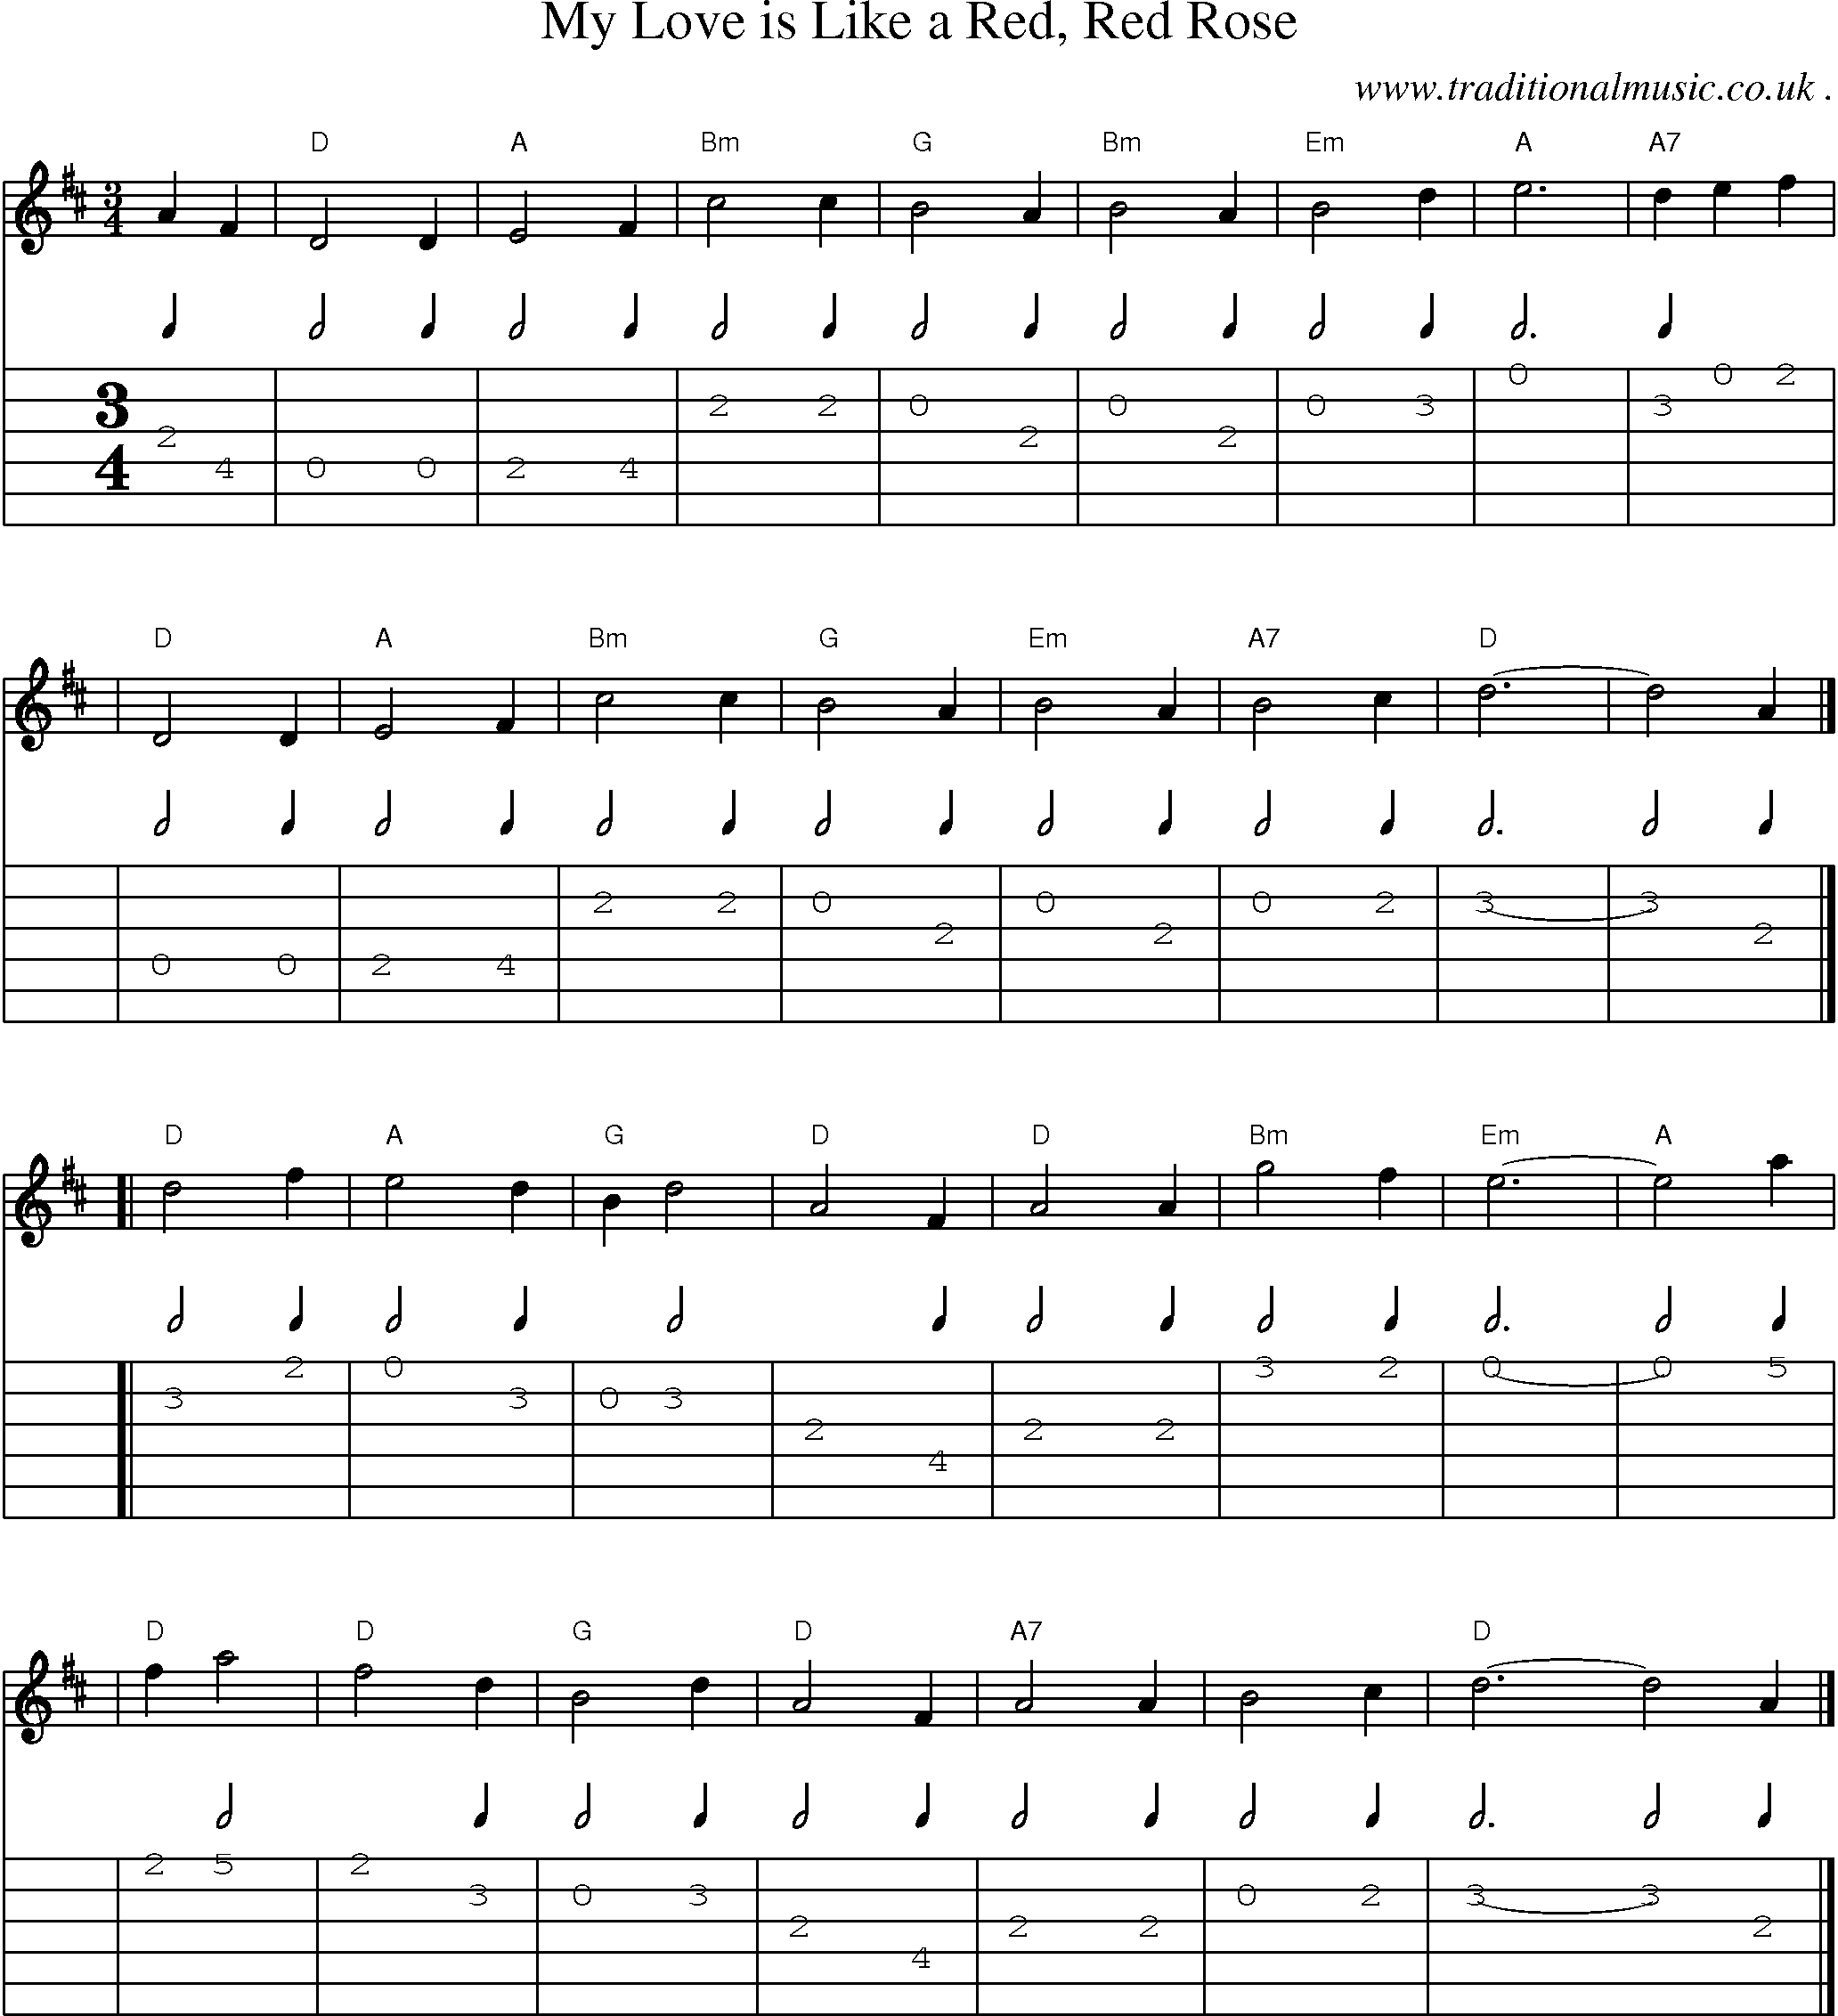 Sheet-music  score, Chords and Guitar Tabs for My Love Is Like A Red Red Rose